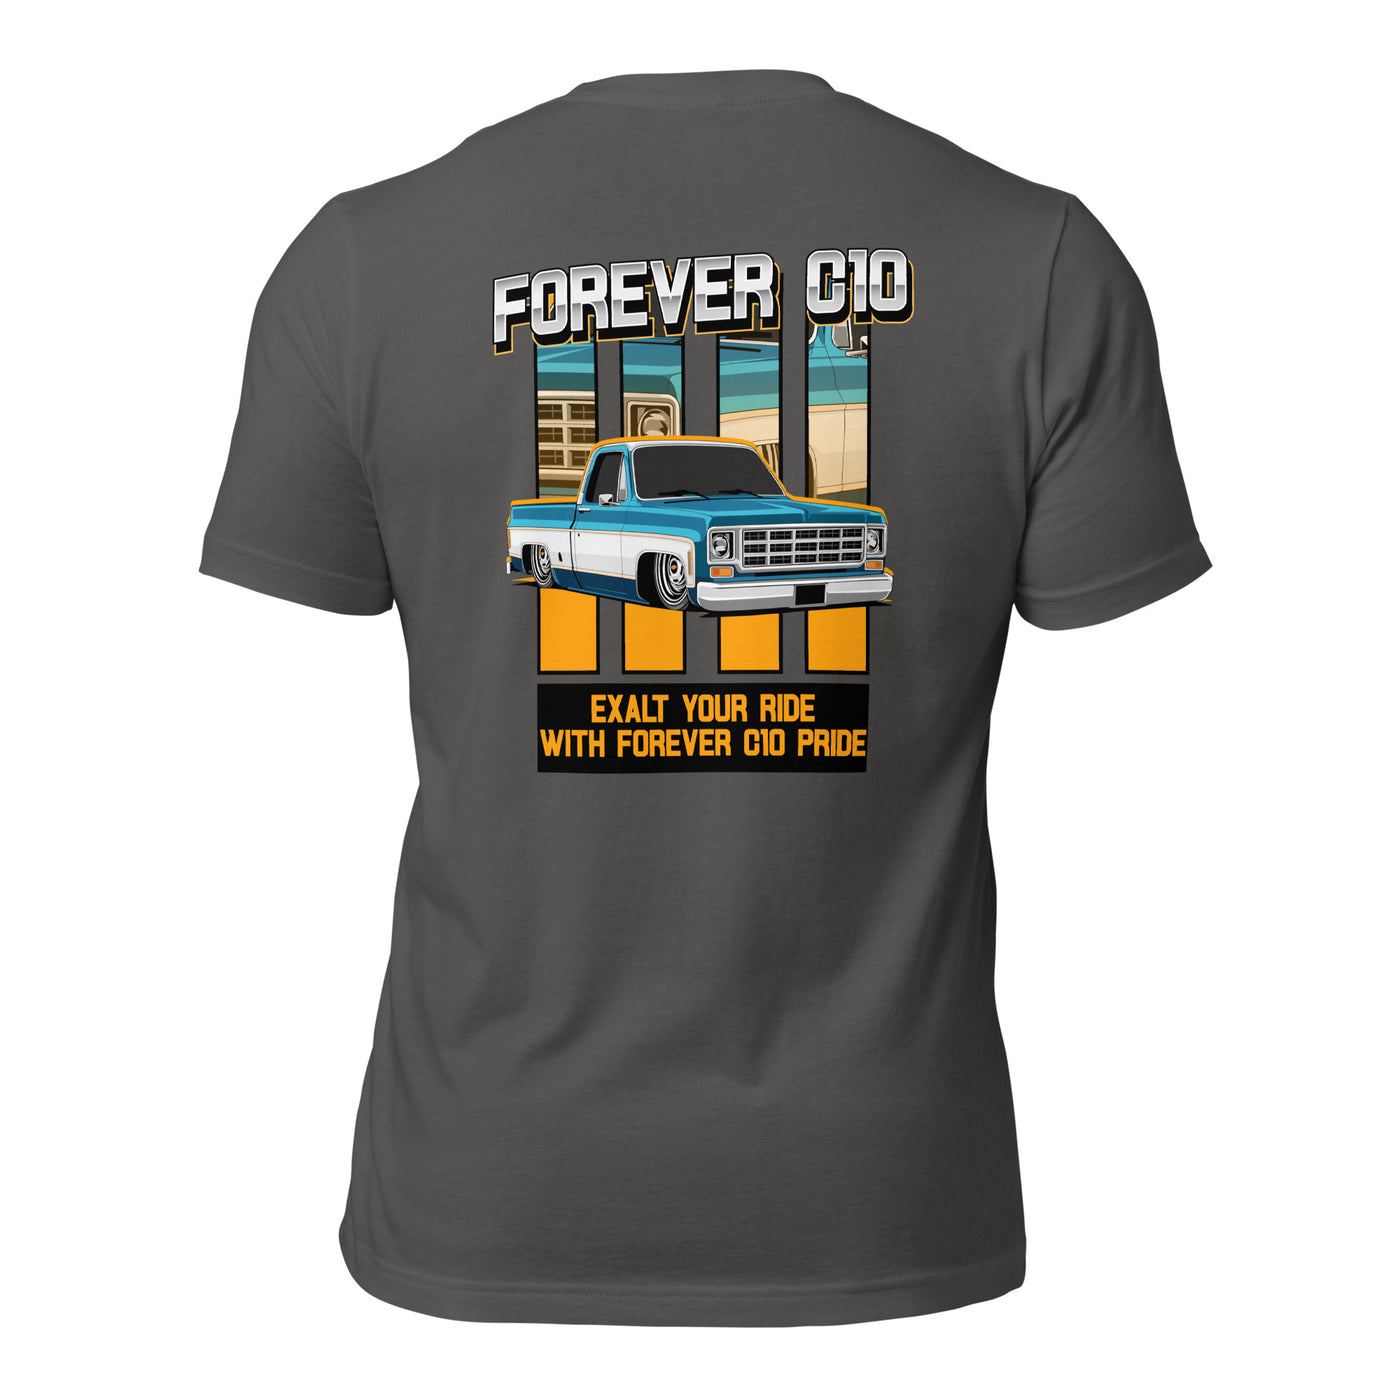 The Gen 3 Forever  Two-Toned Unisex T-shirt (Back Print); Quality Gender Neutral Apparel, Trendsetting Unisex T-Shirts, Urban Unisex Tees, Classic All-Inclusive T-Shirt